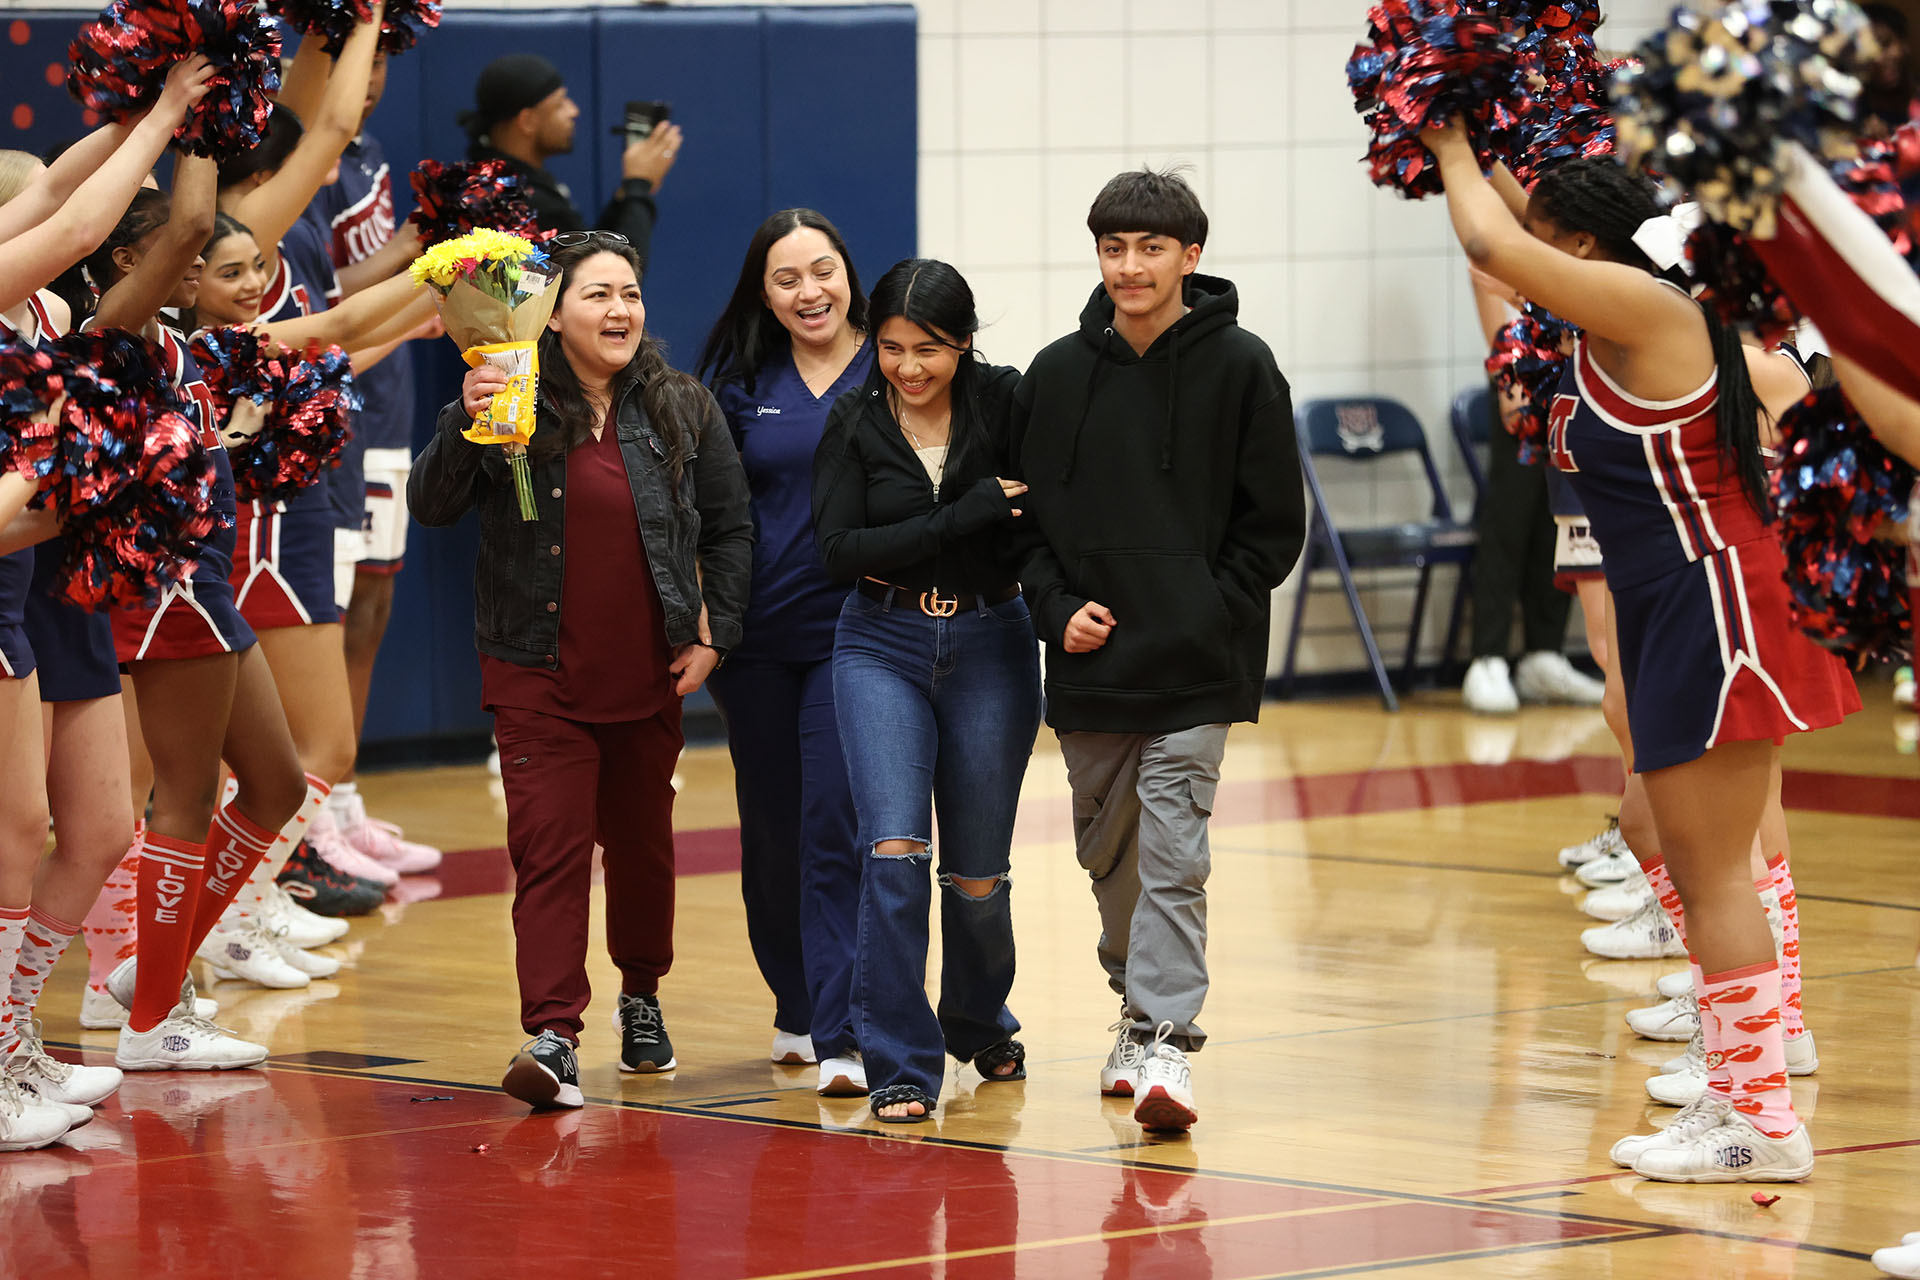 Basketball Student Trainer and her family smiling as they are introduced